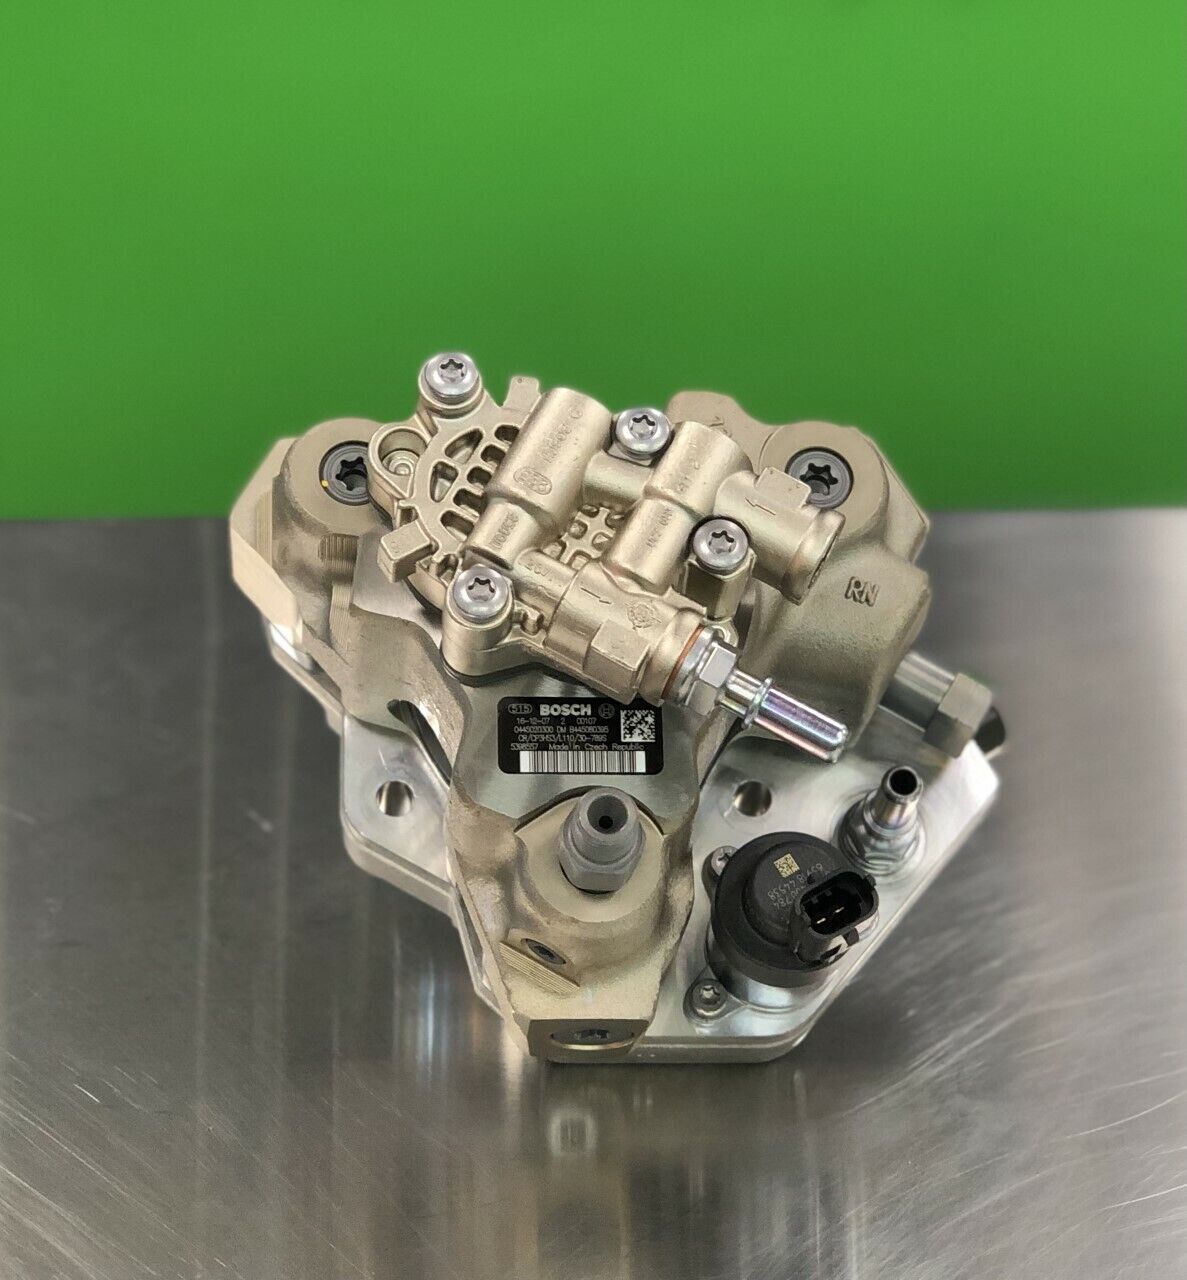 NEW FUEL INJECTION PUMP BOSCH For CUMMINS ISB 6.7L Cab Chassis 2010-up MID RANGE